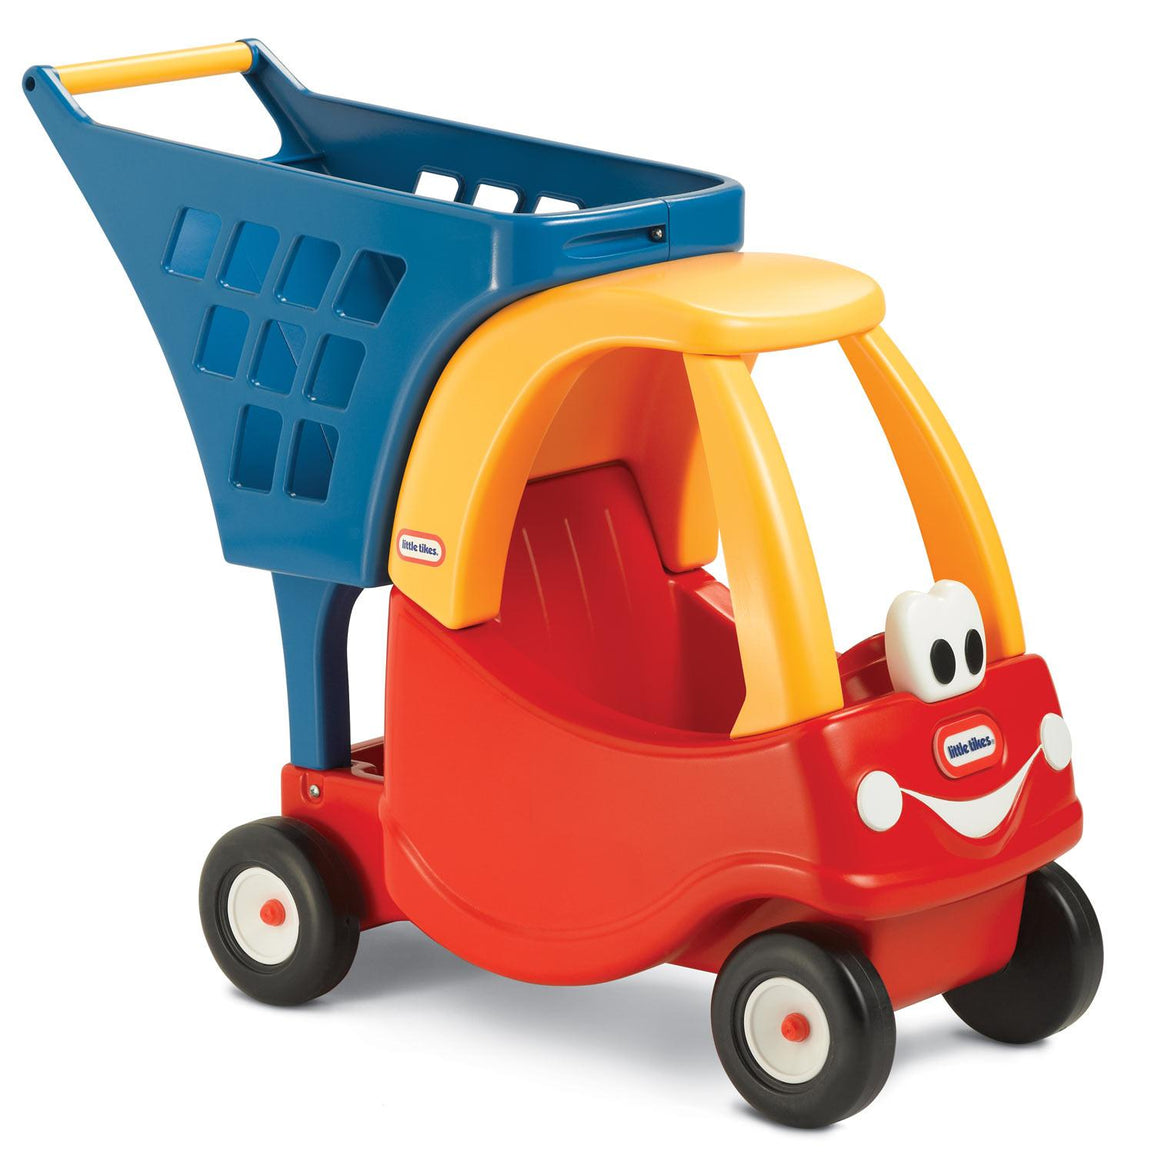 Cozy Coupe Shopping Cart lets kids’ mimic trips to the grocery store, just like mom and dad